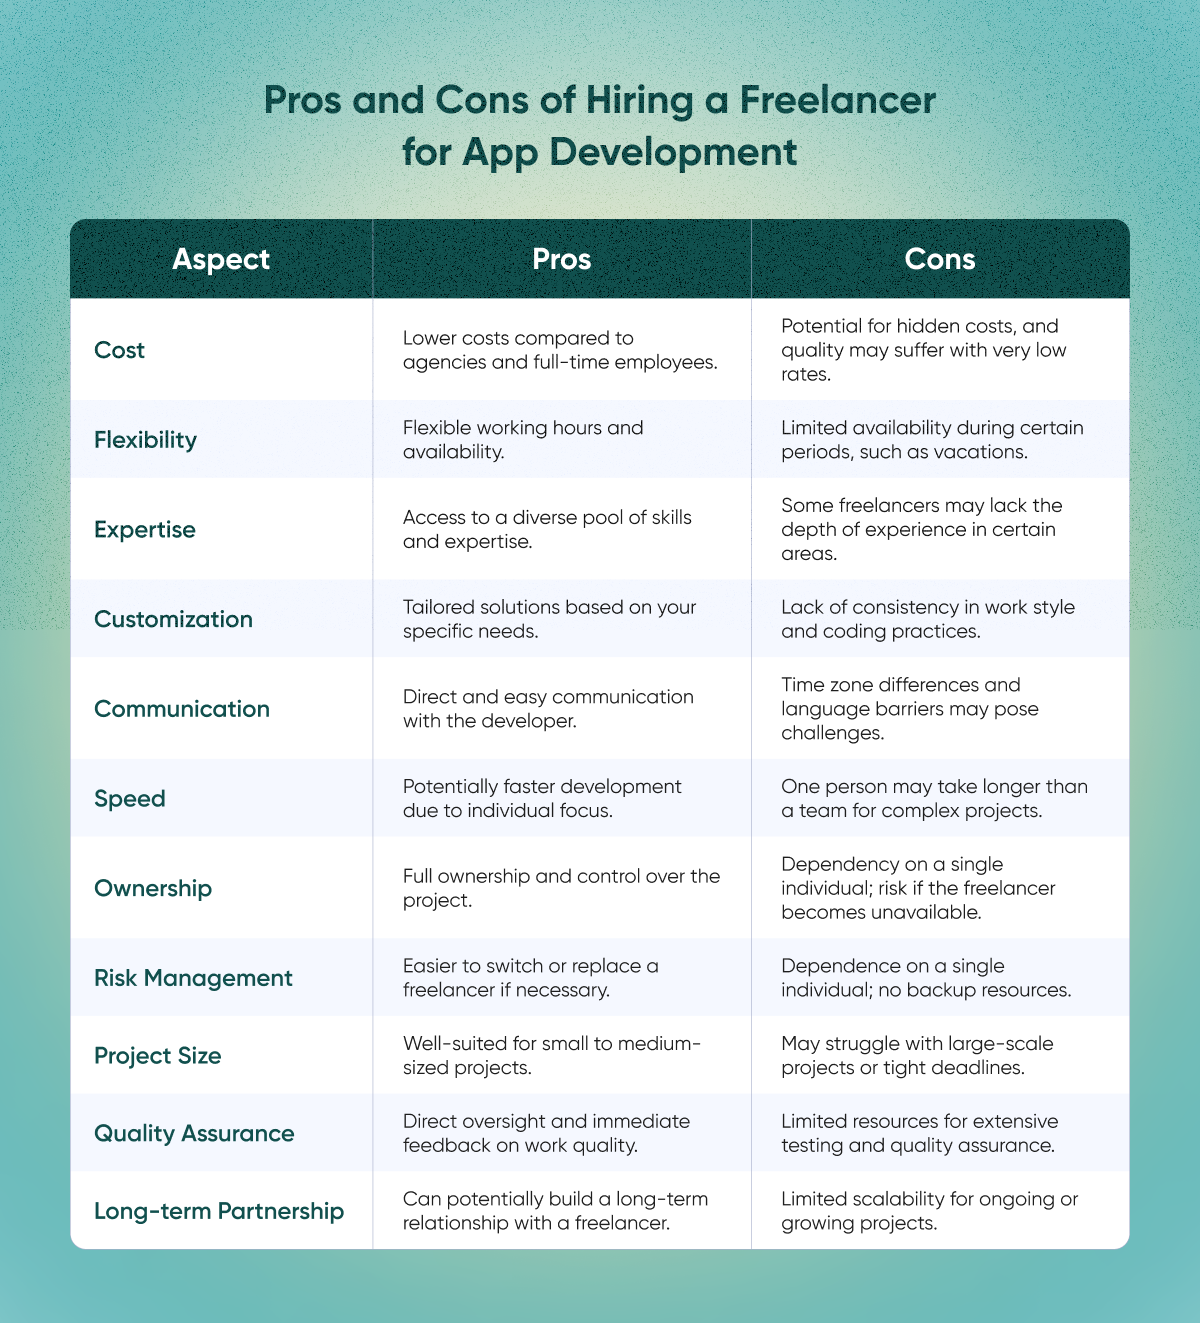 Pros and Cons of Hiring a Freelancer for App Development